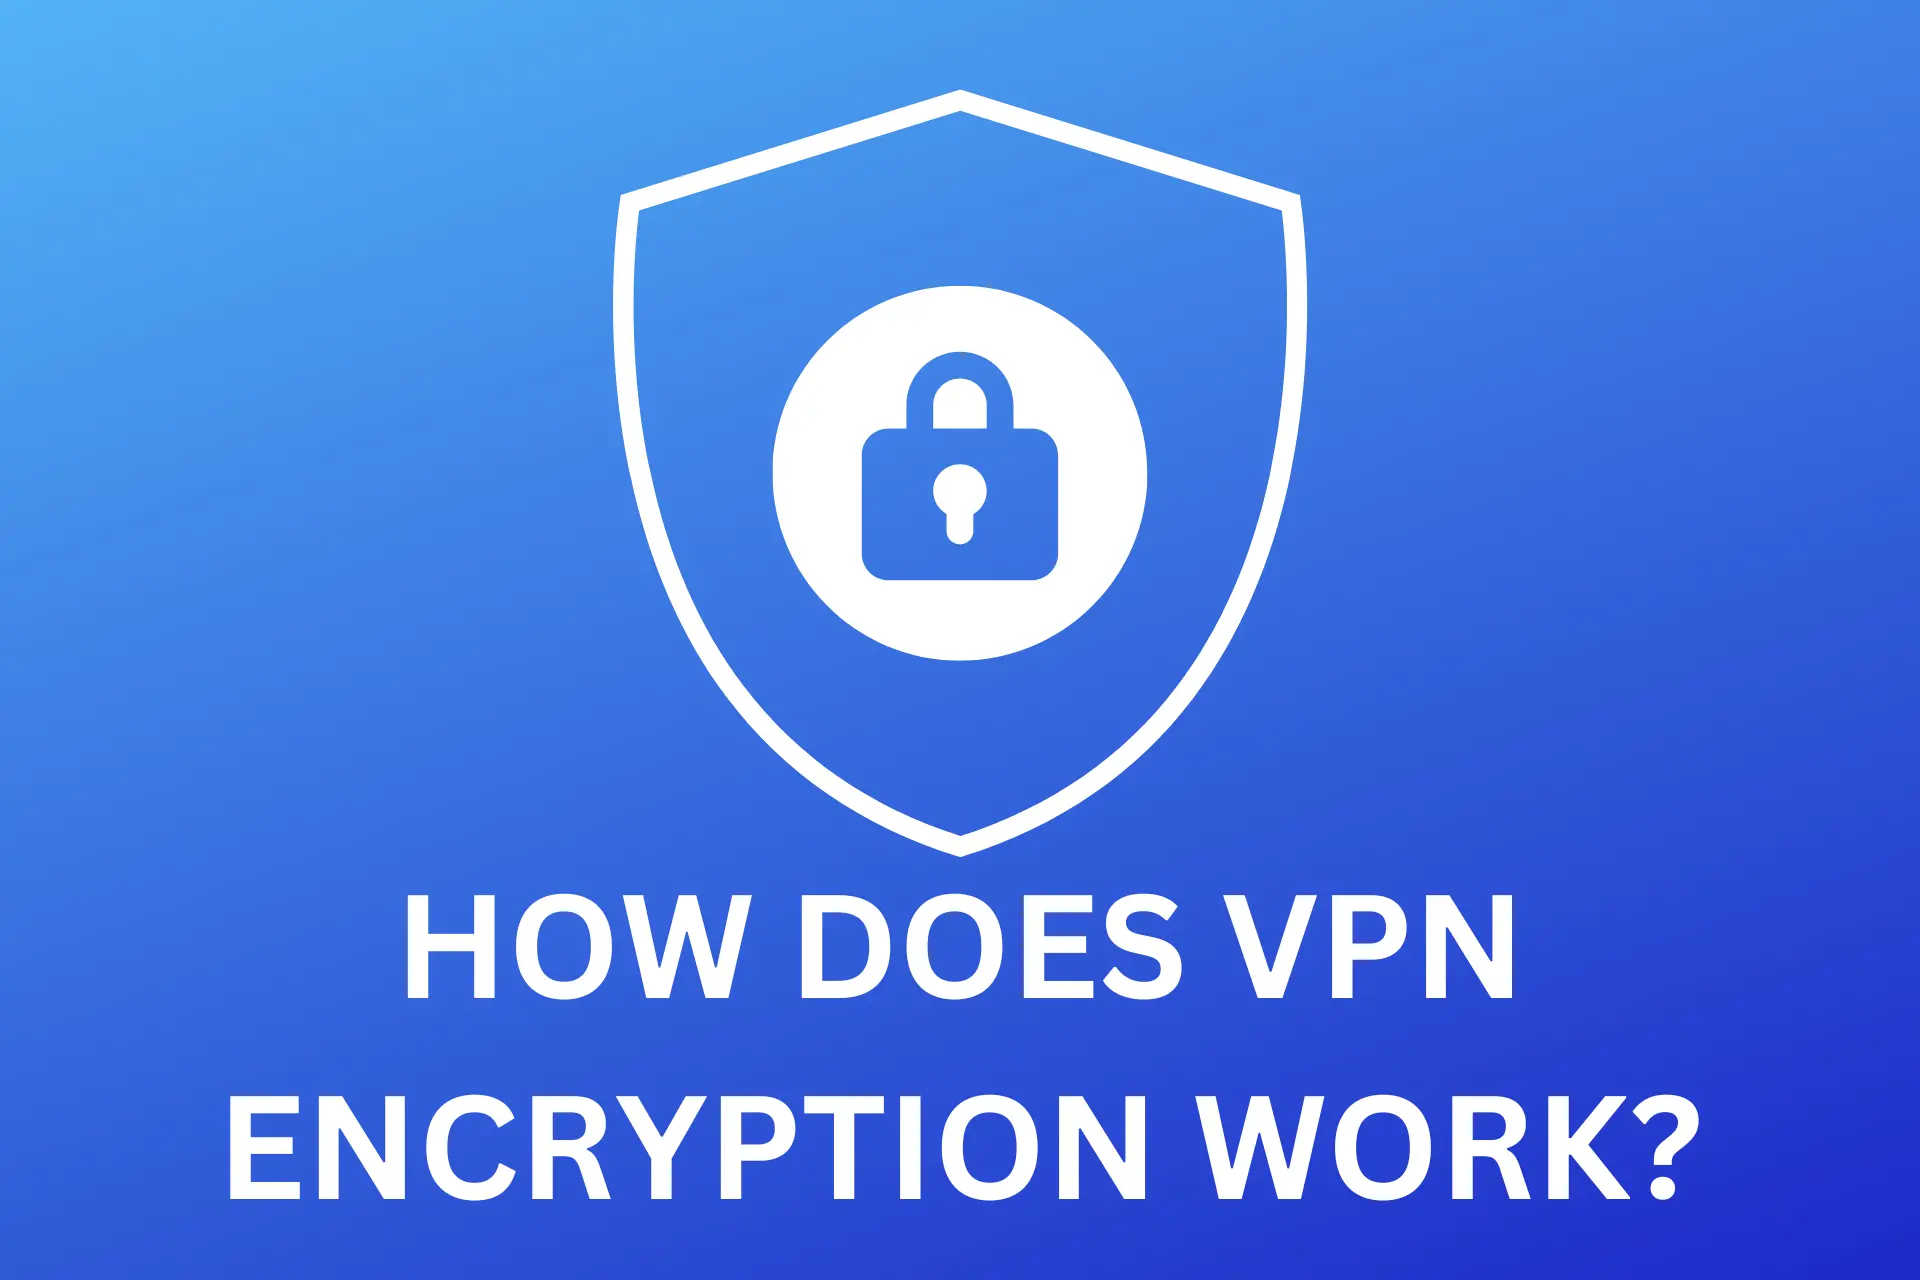 HOW DOES VPN ENCRYPTION WORK